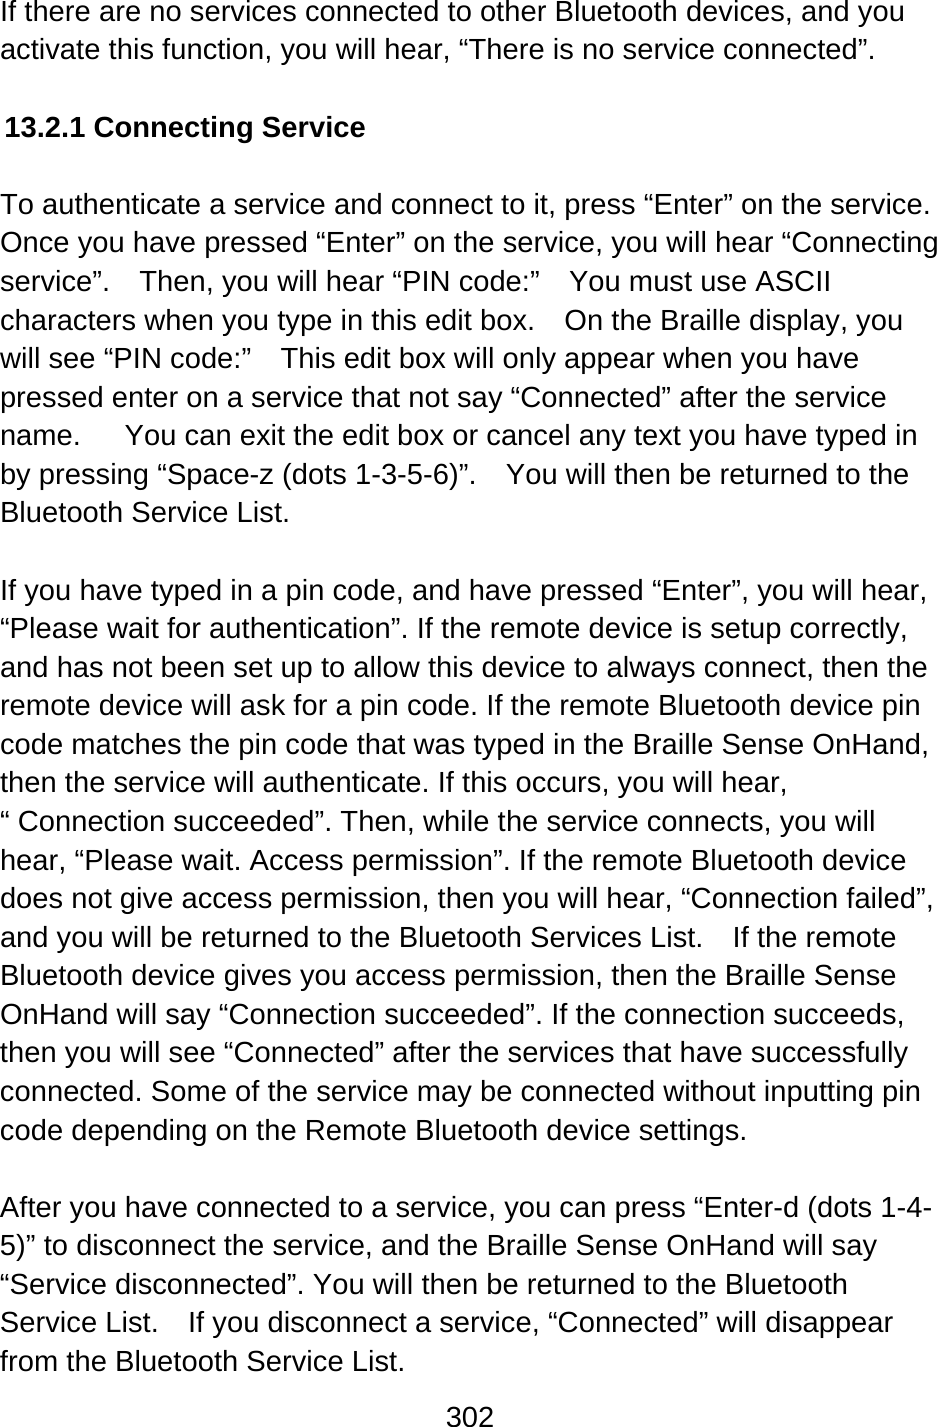 302  If there are no services connected to other Bluetooth devices, and you activate this function, you will hear, “There is no service connected”.  13.2.1 Connecting Service  To authenticate a service and connect to it, press “Enter” on the service.   Once you have pressed “Enter” on the service, you will hear “Connecting service”.    Then, you will hear “PIN code:”    You must use ASCII characters when you type in this edit box.    On the Braille display, you will see “PIN code:”    This edit box will only appear when you have pressed enter on a service that not say “Connected” after the service name.      You can exit the edit box or cancel any text you have typed in by pressing “Space-z (dots 1-3-5-6)”.    You will then be returned to the Bluetooth Service List.  If you have typed in a pin code, and have pressed “Enter”, you will hear, “Please wait for authentication”. If the remote device is setup correctly, and has not been set up to allow this device to always connect, then the remote device will ask for a pin code. If the remote Bluetooth device pin code matches the pin code that was typed in the Braille Sense OnHand, then the service will authenticate. If this occurs, you will hear, “ Connection succeeded”. Then, while the service connects, you will hear, “Please wait. Access permission”. If the remote Bluetooth device does not give access permission, then you will hear, “Connection failed”, and you will be returned to the Bluetooth Services List.    If the remote Bluetooth device gives you access permission, then the Braille Sense OnHand will say “Connection succeeded”. If the connection succeeds, then you will see “Connected” after the services that have successfully connected. Some of the service may be connected without inputting pin code depending on the Remote Bluetooth device settings.  After you have connected to a service, you can press “Enter-d (dots 1-4-5)” to disconnect the service, and the Braille Sense OnHand will say “Service disconnected”. You will then be returned to the Bluetooth Service List.    If you disconnect a service, “Connected” will disappear from the Bluetooth Service List. 